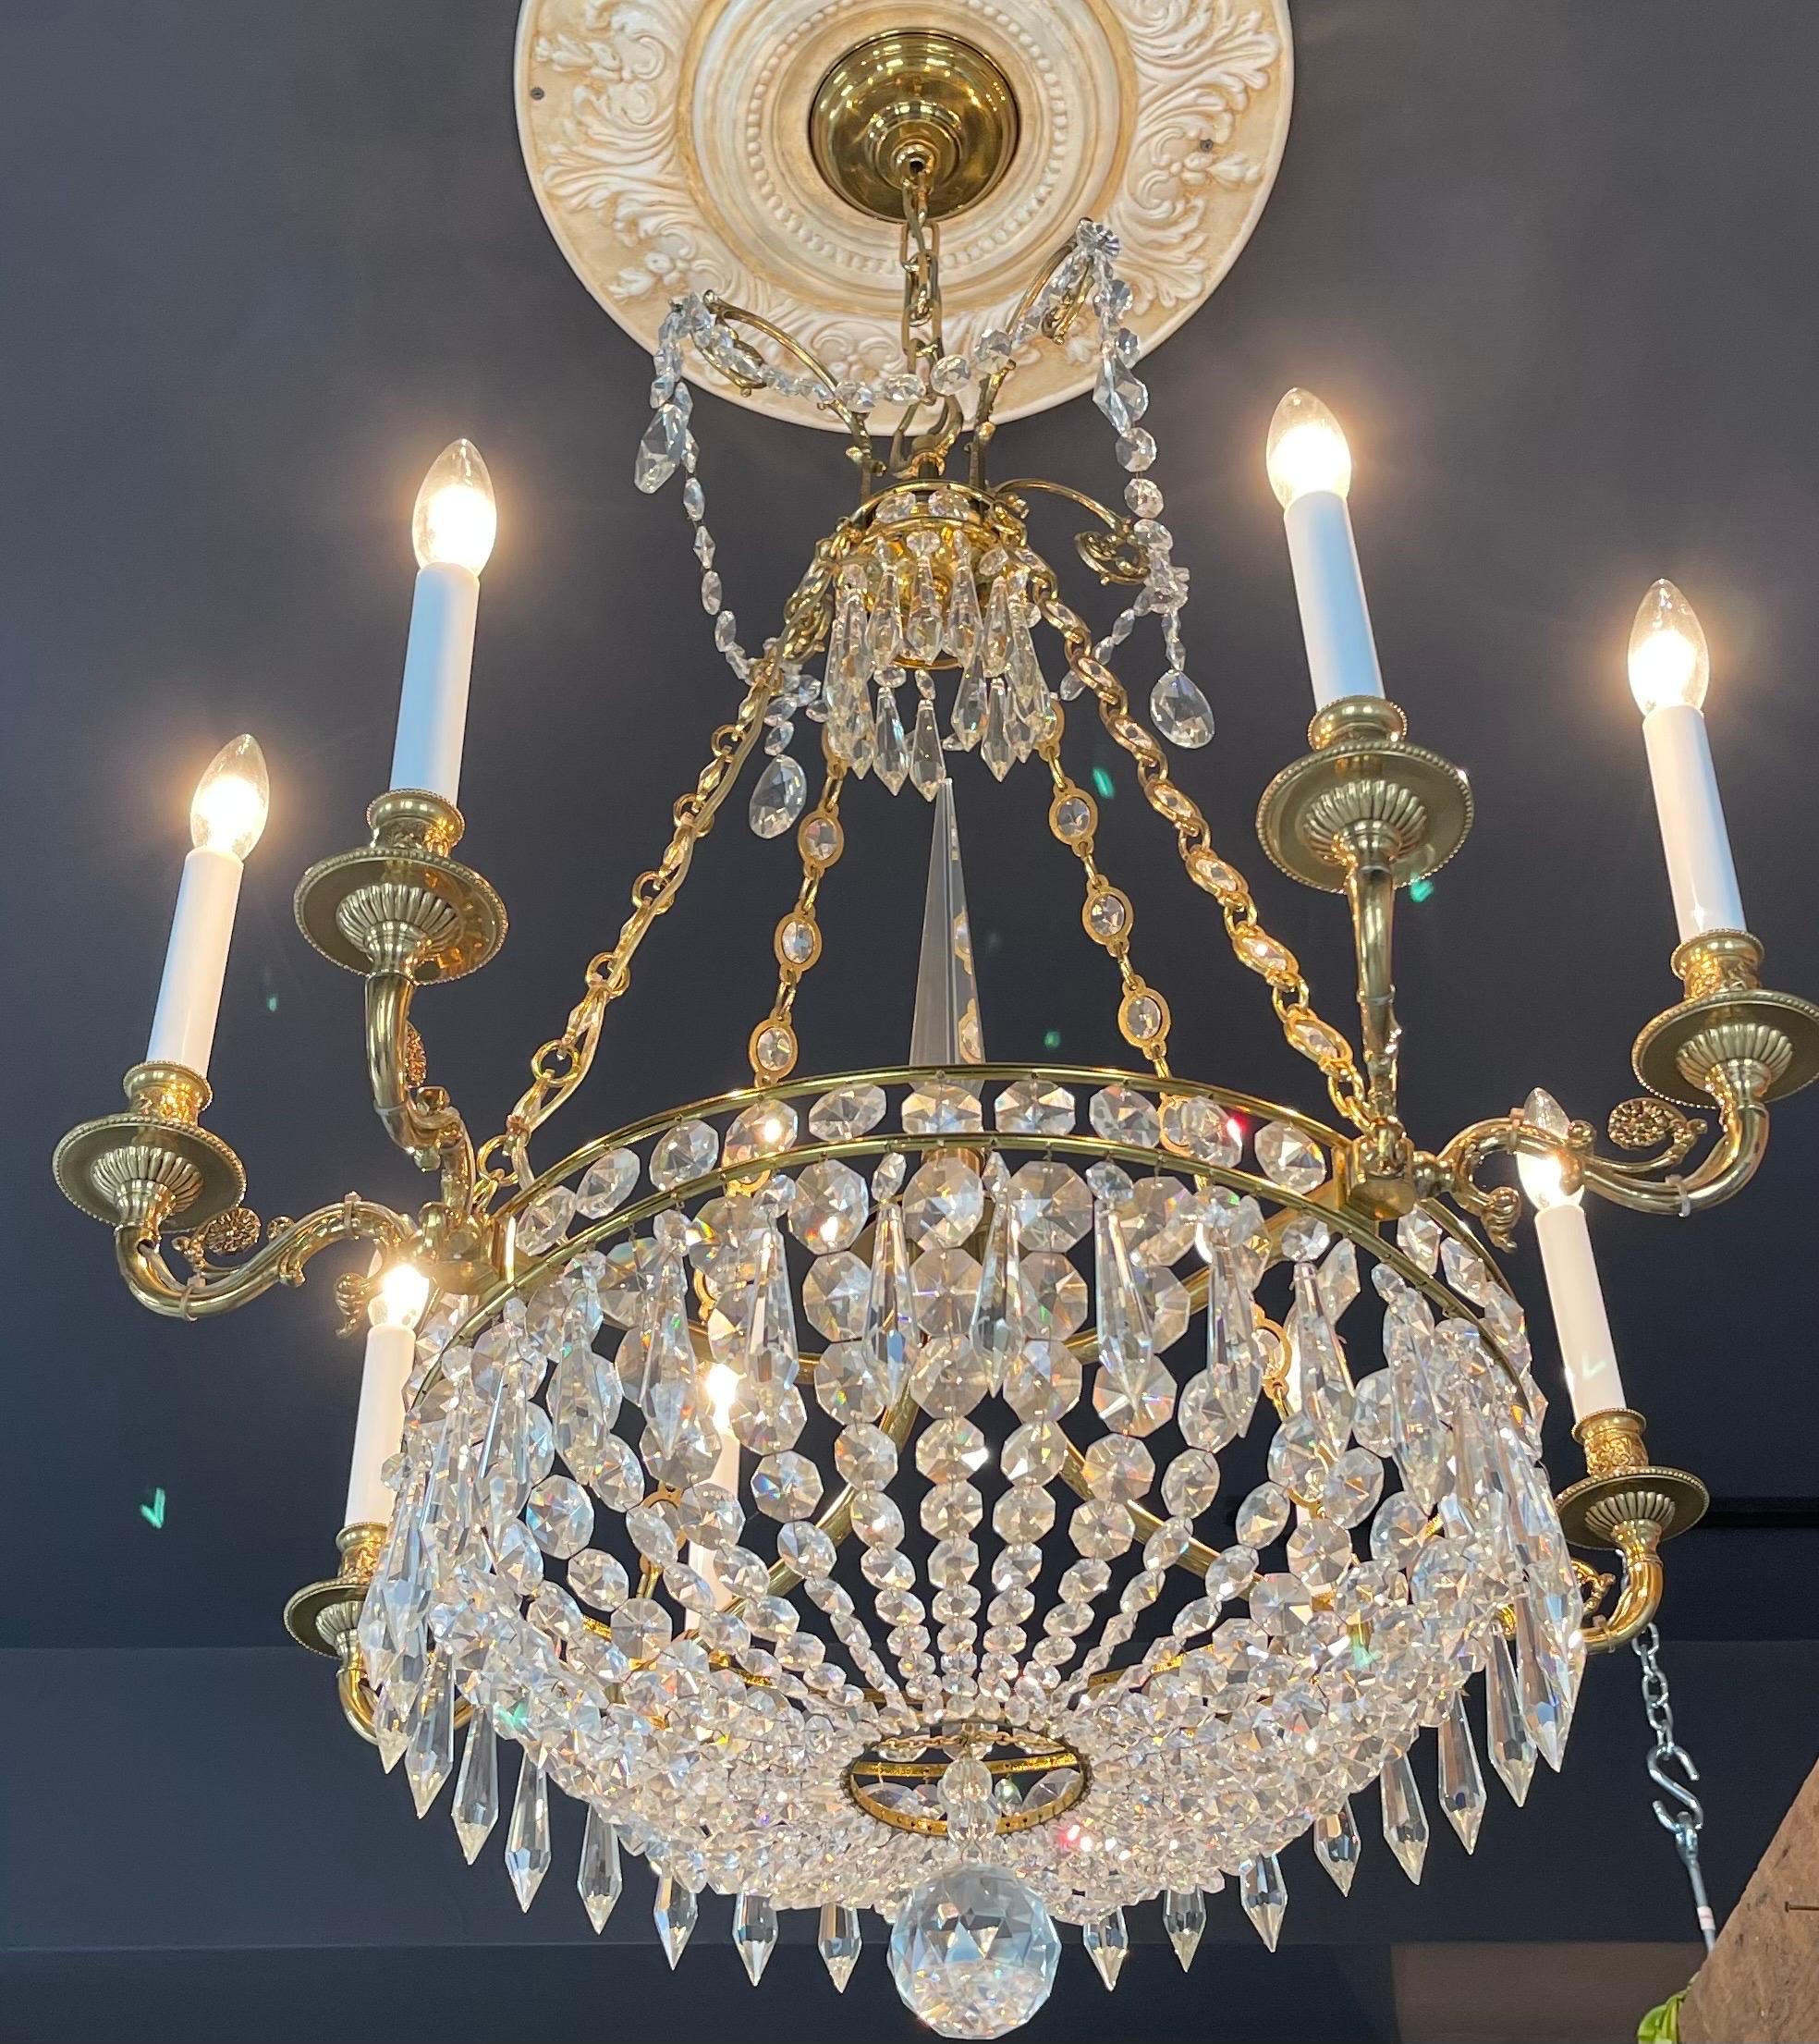 A fine French empire neoclassical Regency dore bronze crystal basket chandelier with 8 candelabra arms.
 